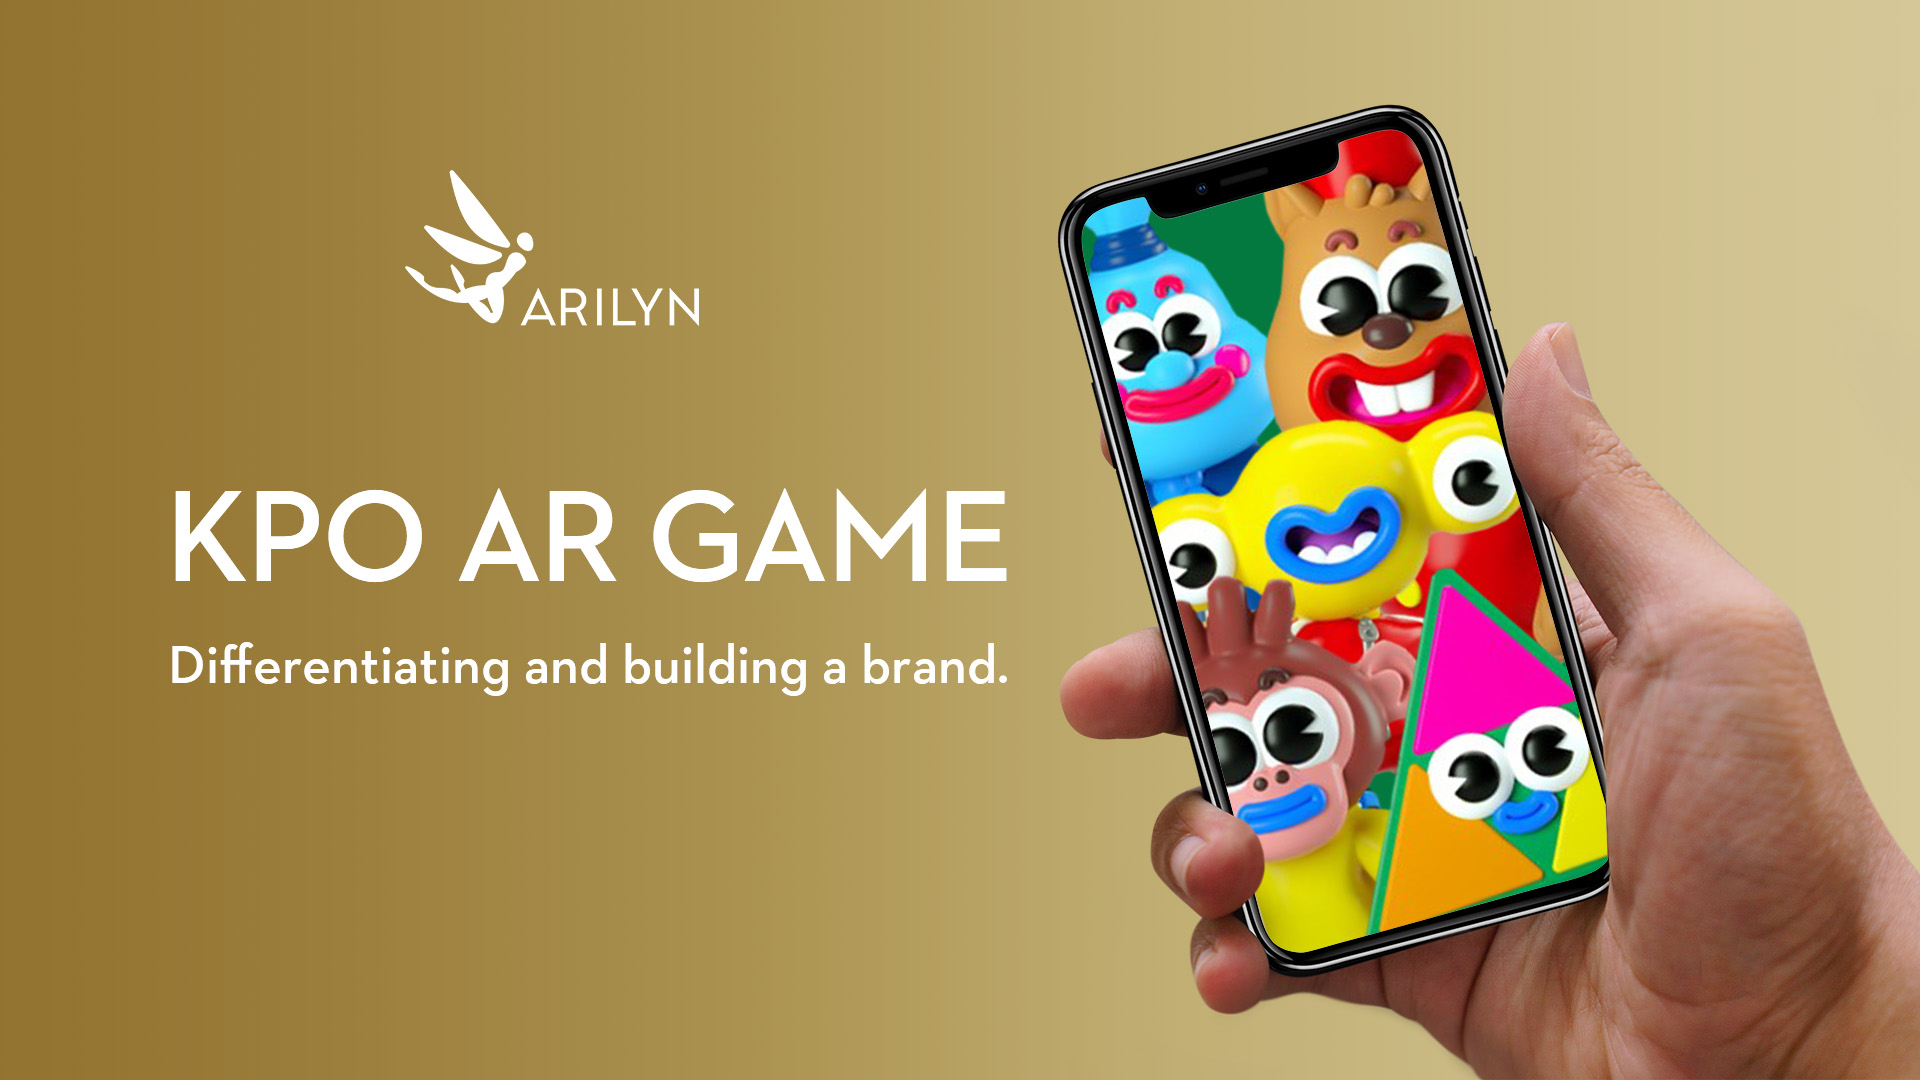 Differentiating and building a brand through an AR game - case KPO